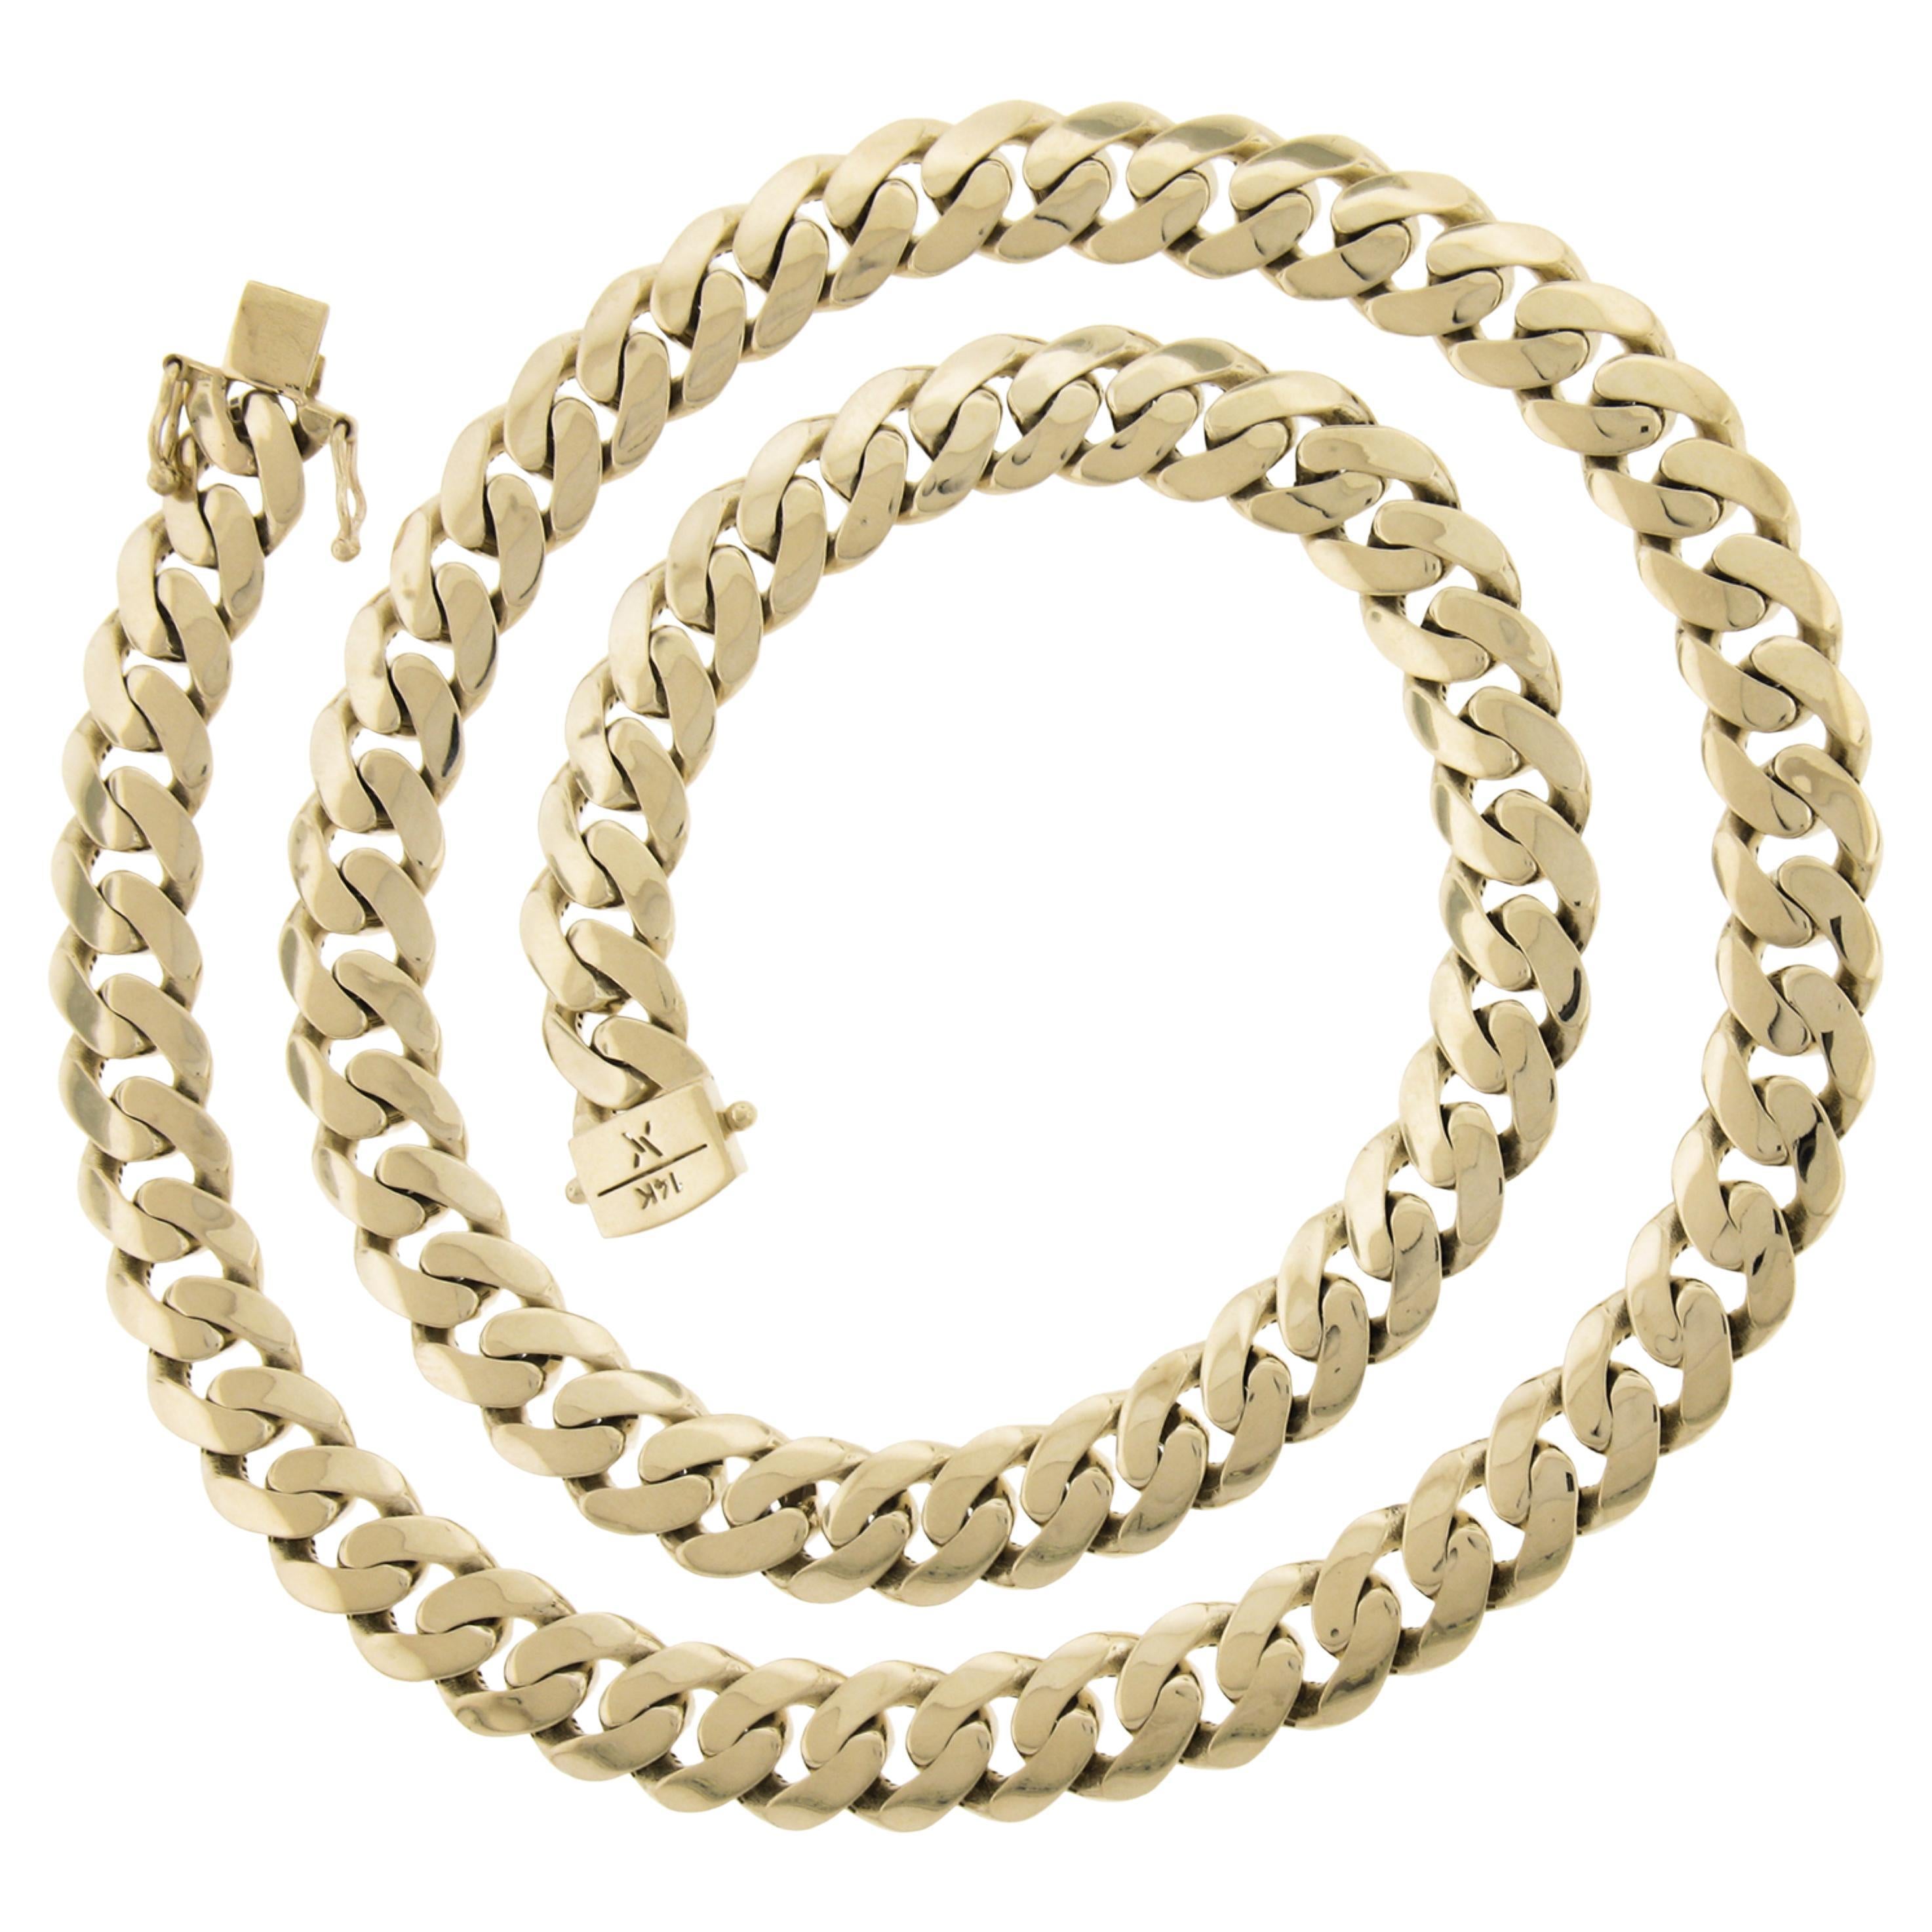 Unisex Solid 14k Yellow Gold 10.1mm Long 23" Flat Cuban Curb Link Chain Necklace